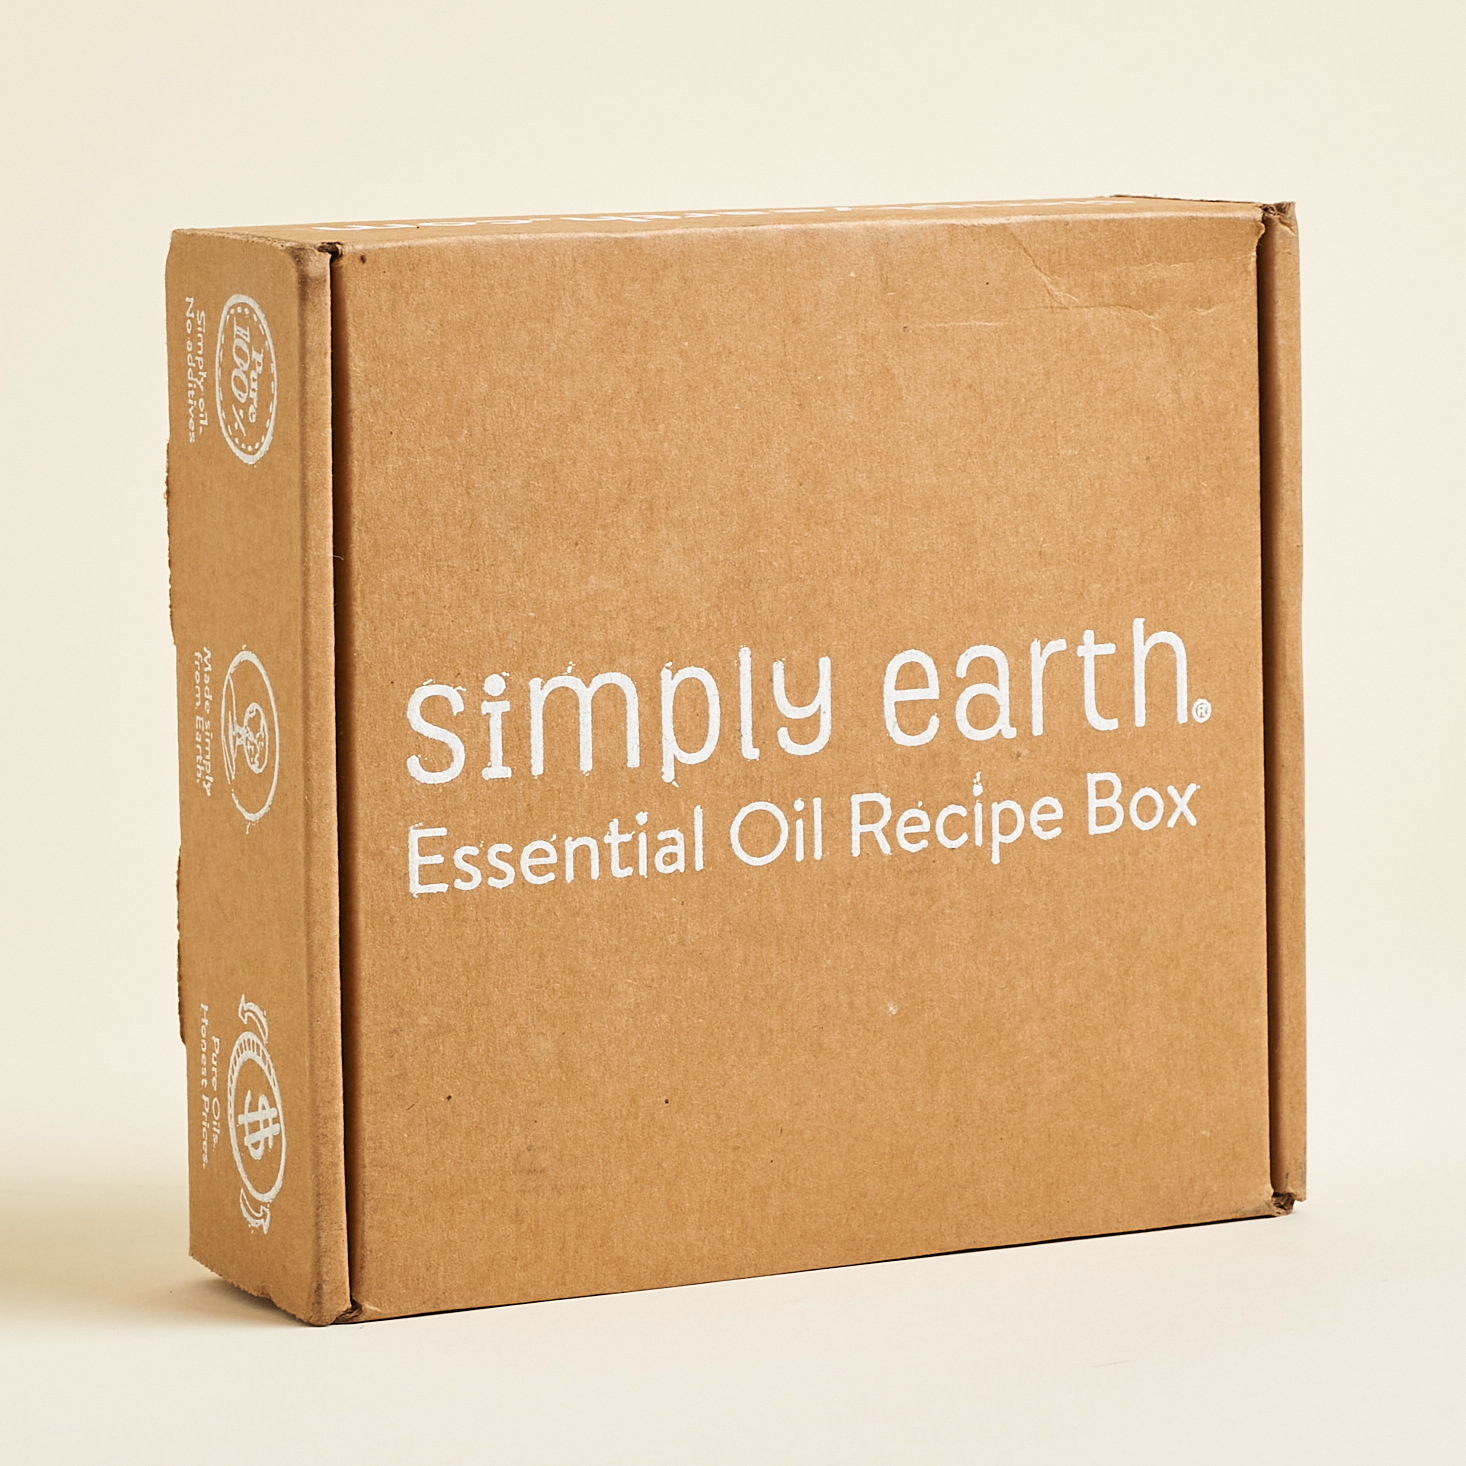 Simply Earth Essential Oil Recipe Box Review + Coupon – December 2020